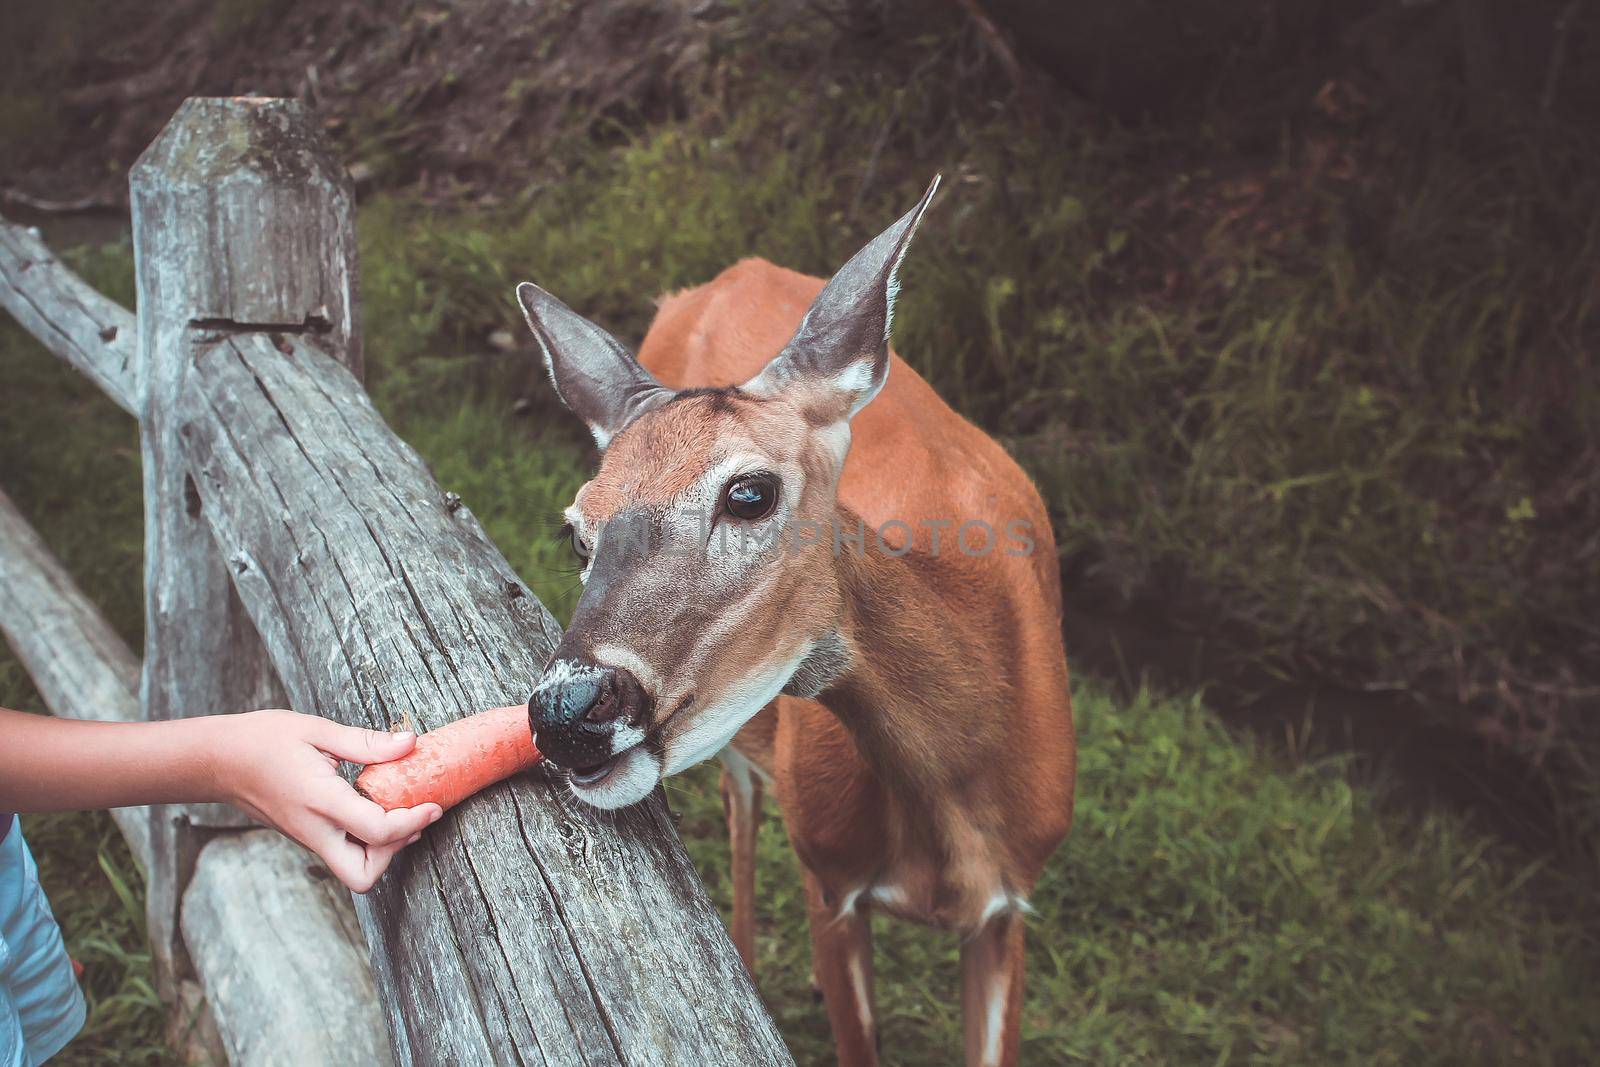 Feeding the deer in the zoo. The deer in the fence eat a carrot piece, fed by the child's hand. by JuliaDorian